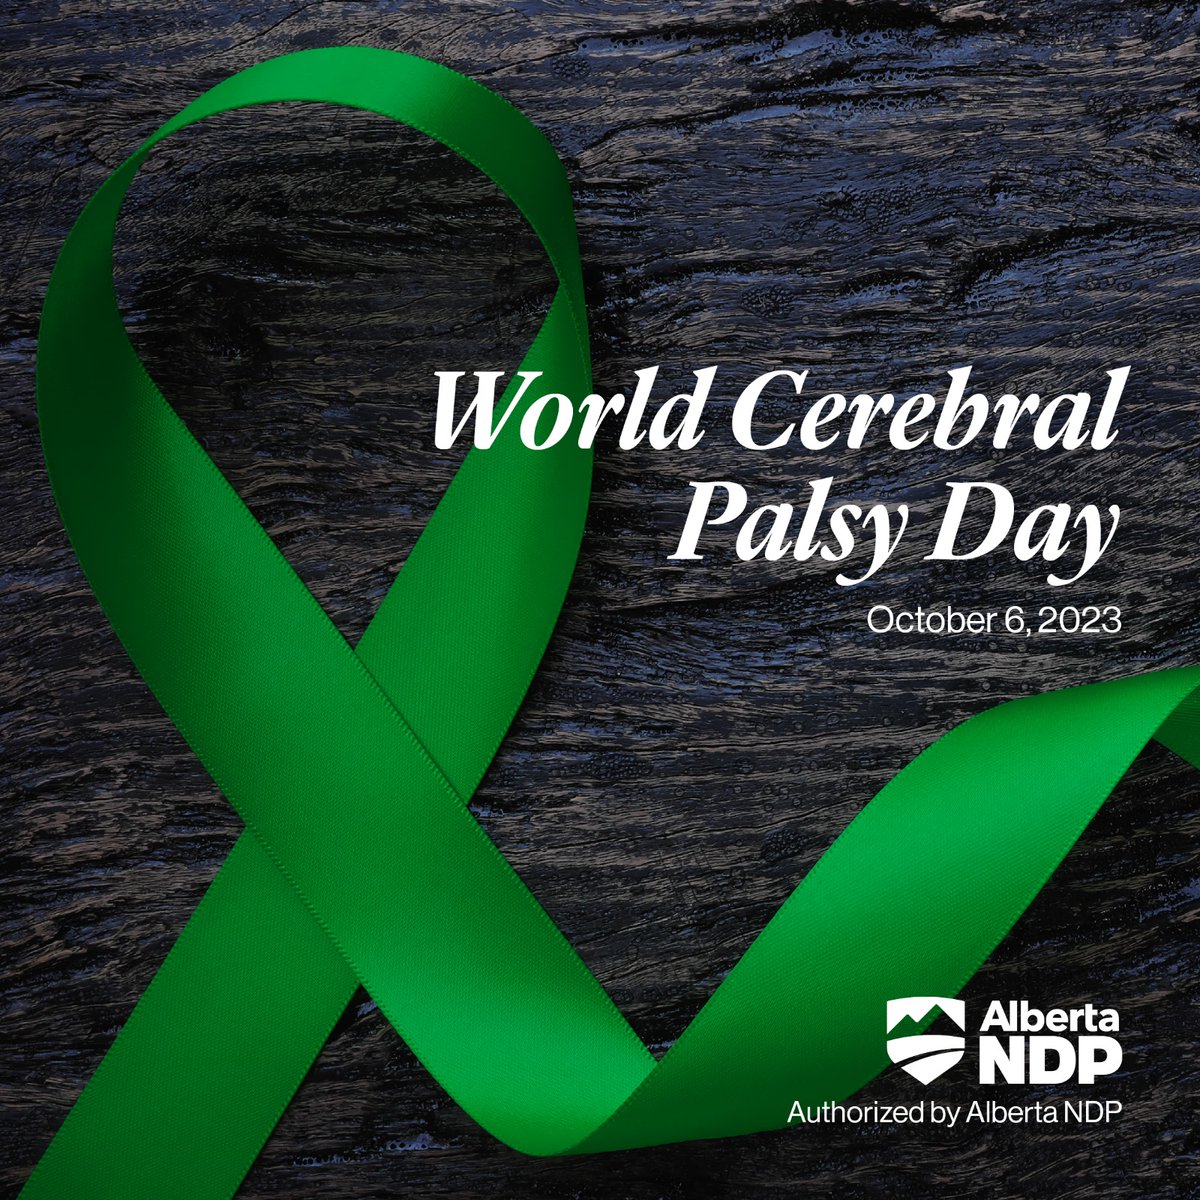 It's #WorldCerebralPalsyDay. We see the challenges faced by our neighbors, friends & loved ones with CP. We could all use a more accessible world. Let's end discrimination faced by children & adults with CP. We love you, you matter. #GlowGreenForCP cpalberta.com